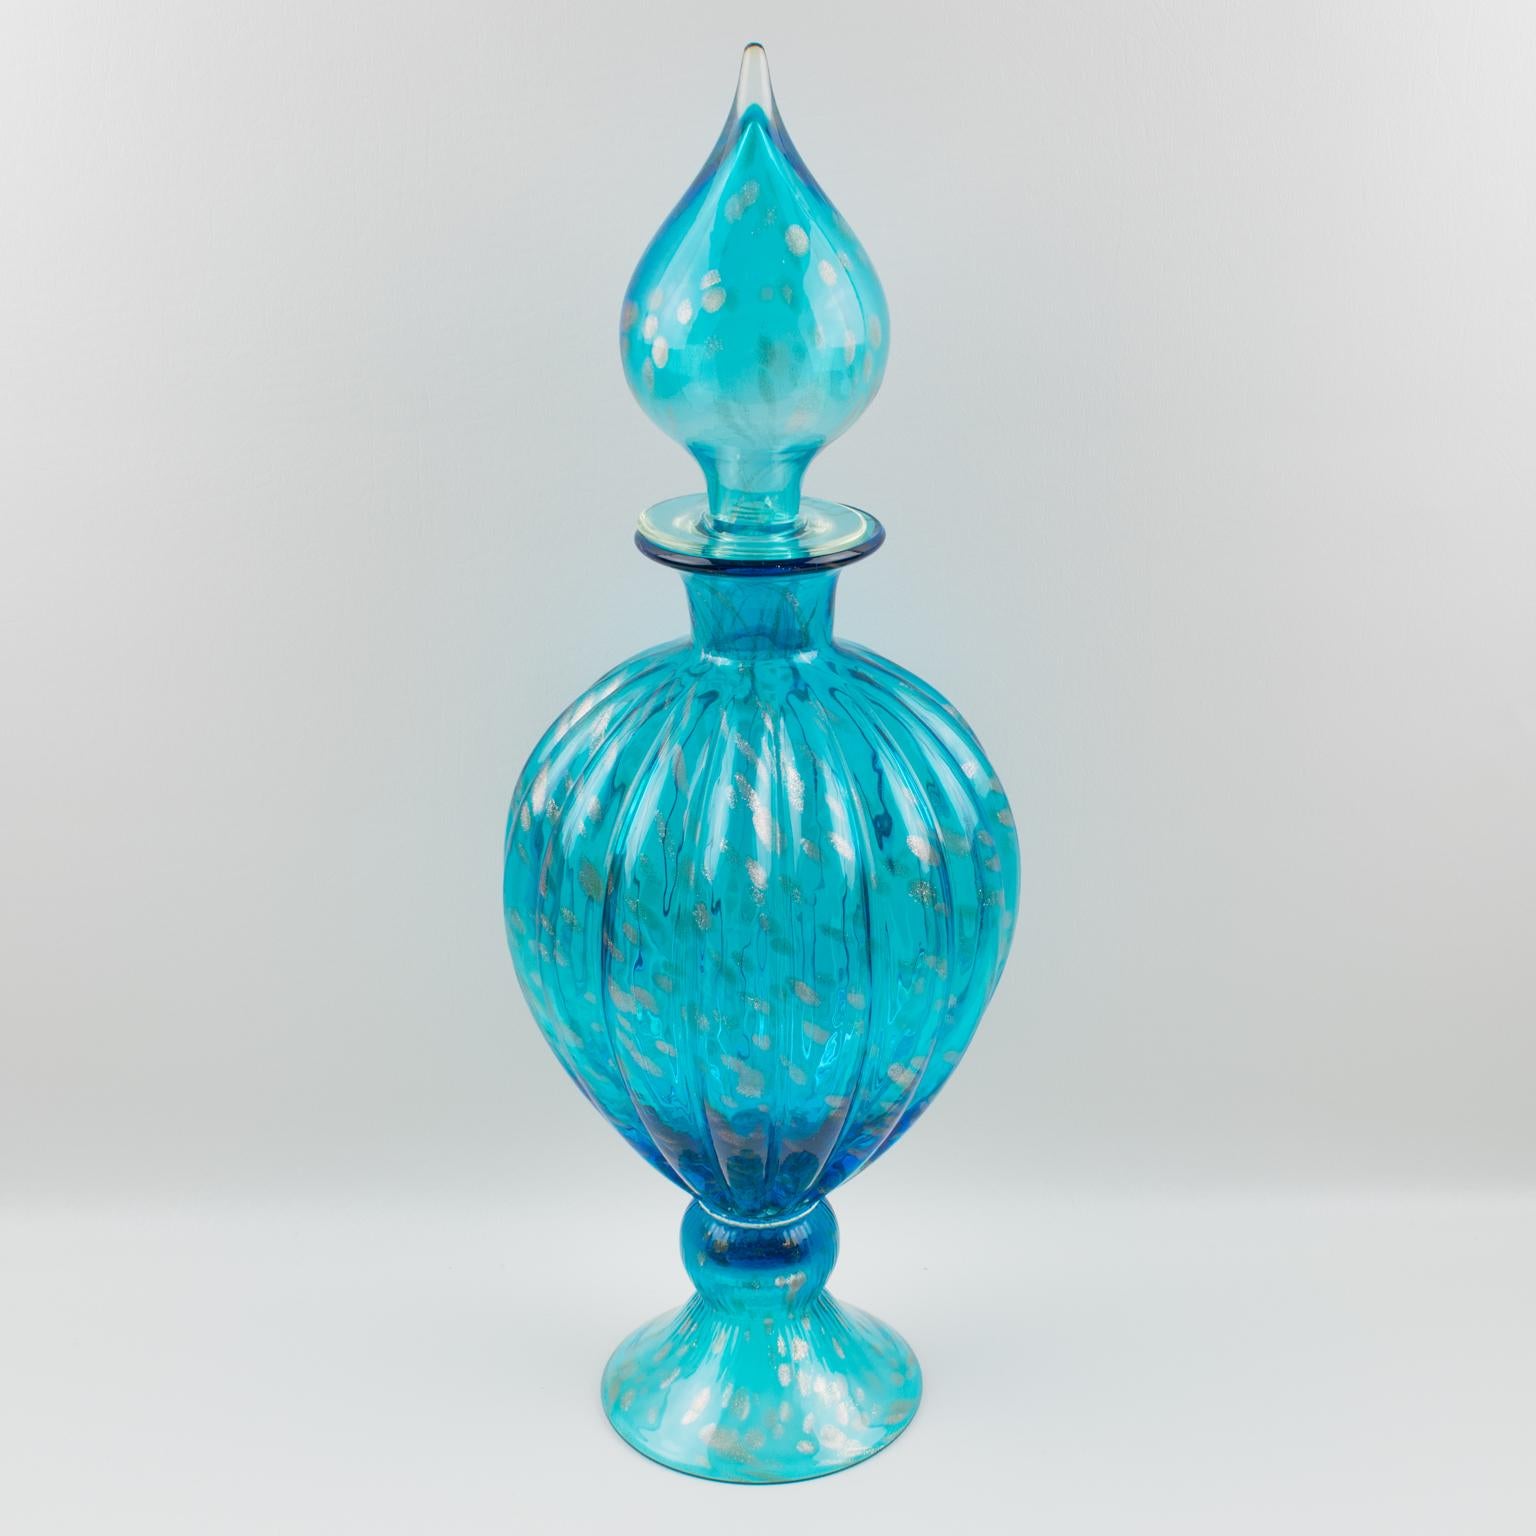 Nice oversized turquoise blue glass apothecary dispenser or jar, made in Italy in the region of Empoli. A stately and eye-catching piece that can stand alone, with beautiful patterns and elegant transparent turquoise blue color with gold flake